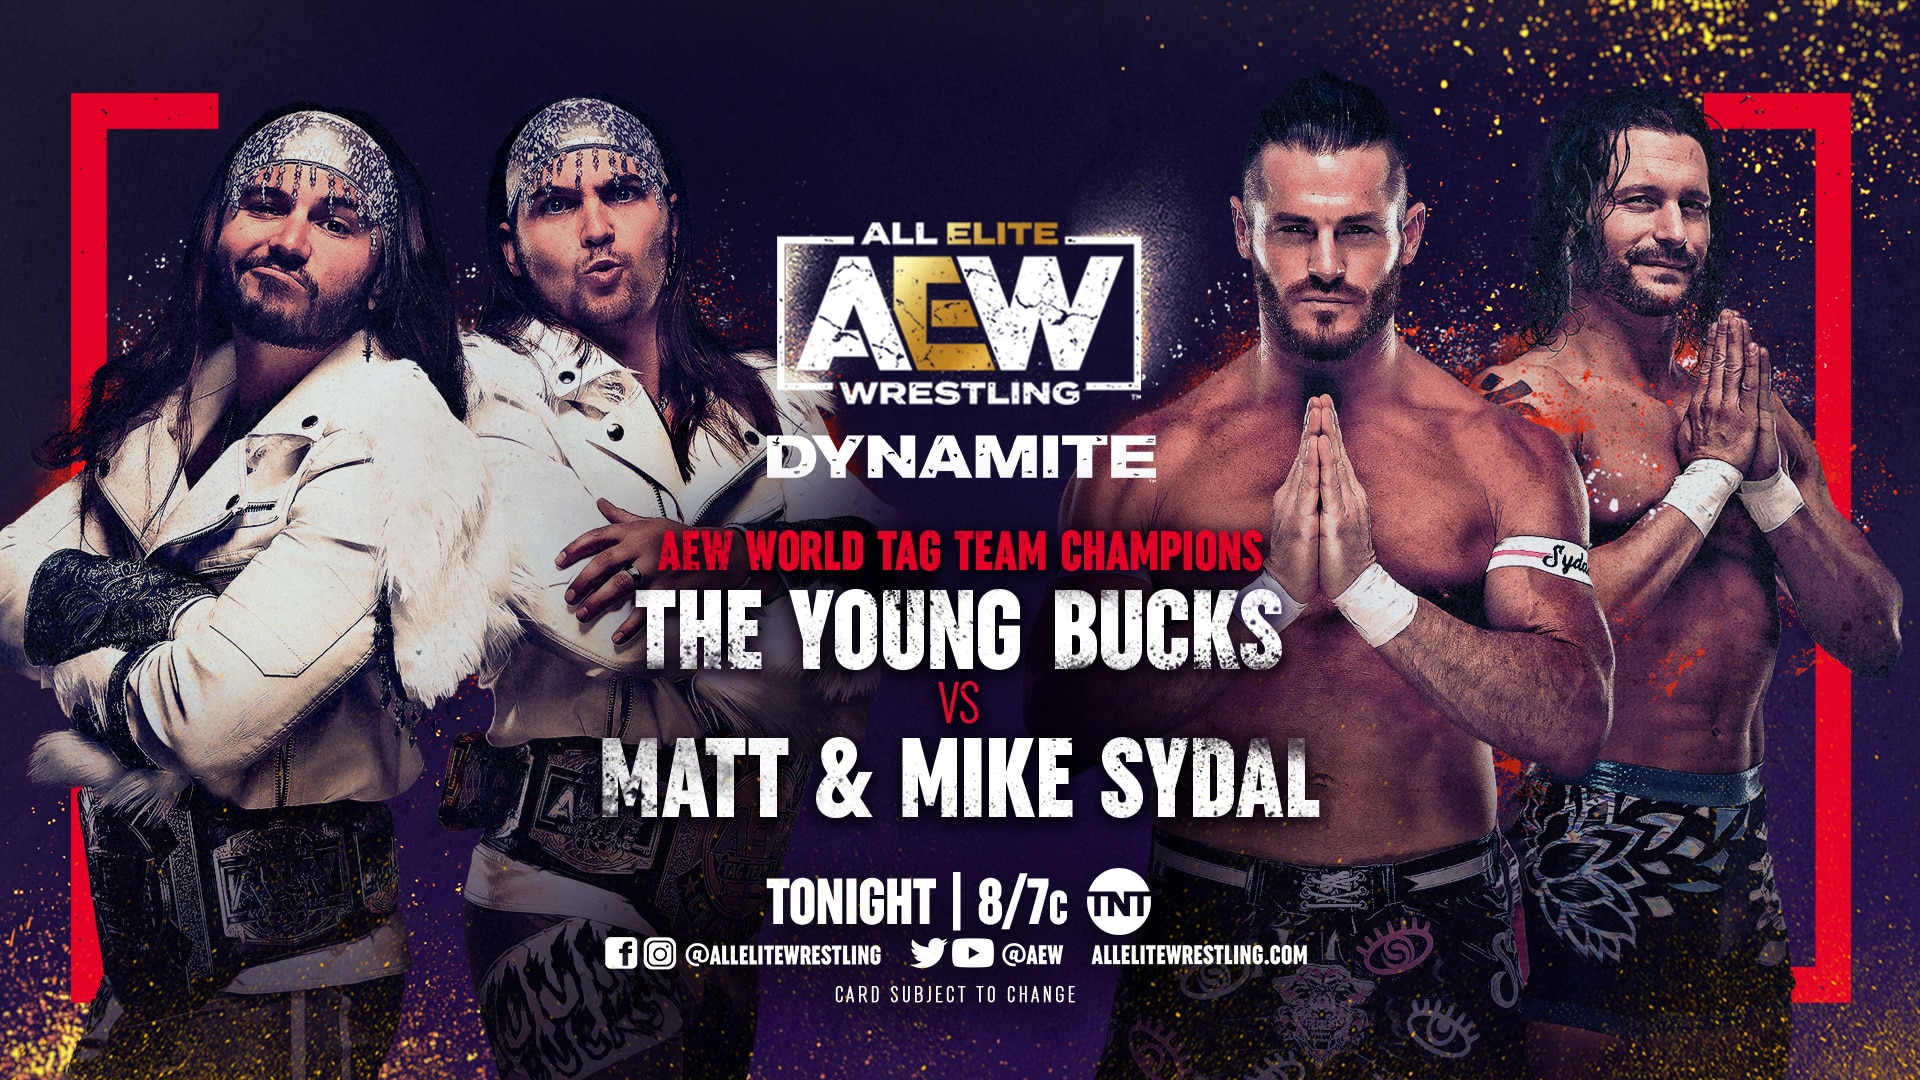 The Young Bucks vs The Sydal Brothers